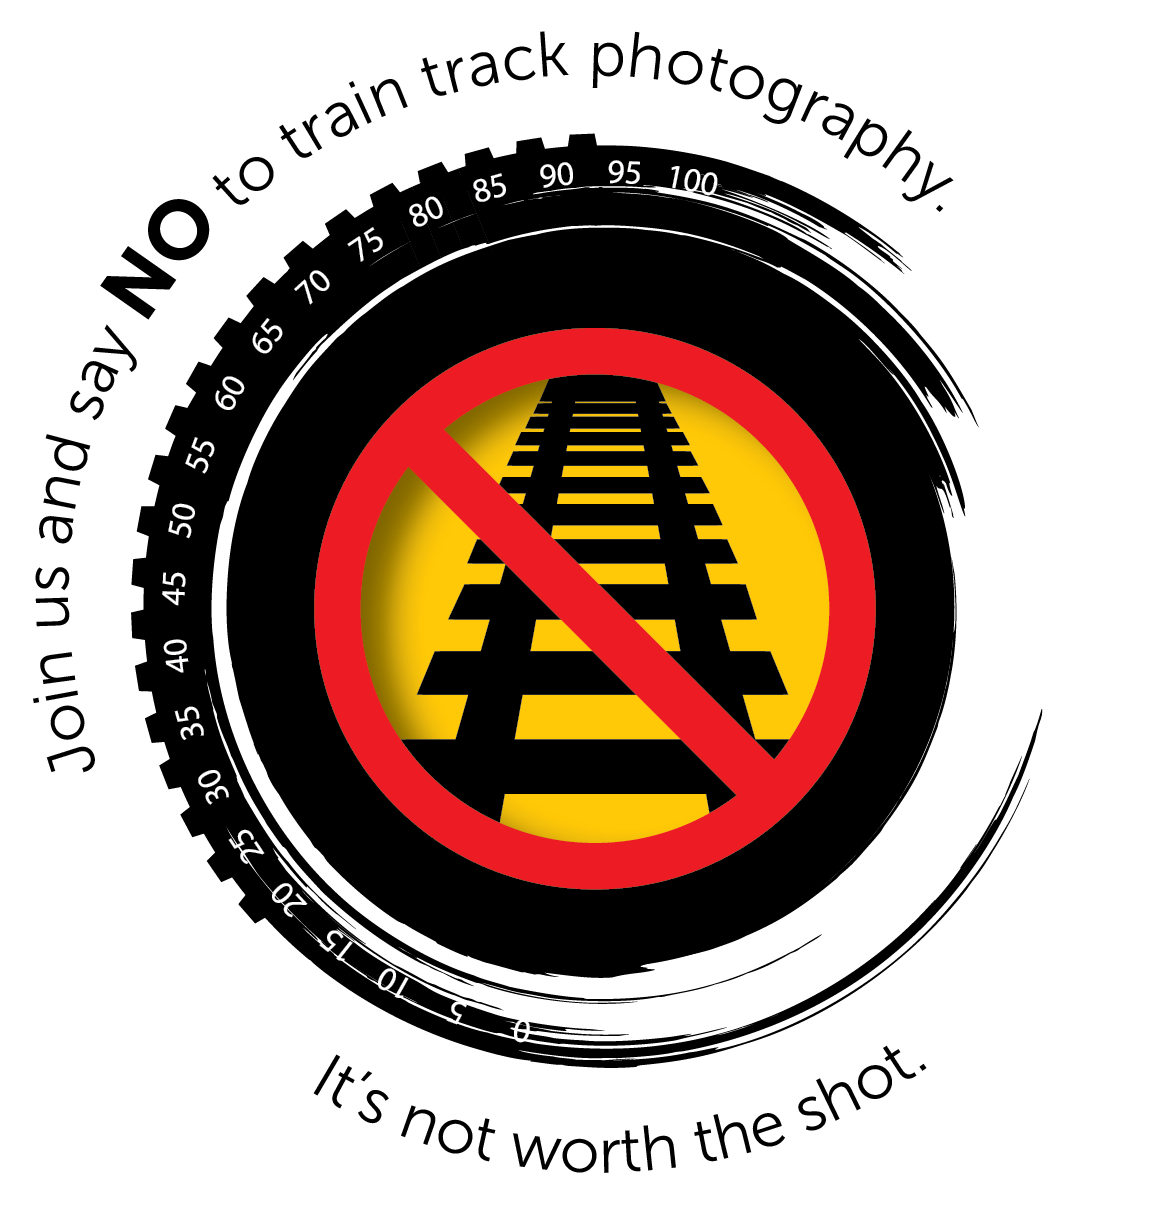 Stop track photography